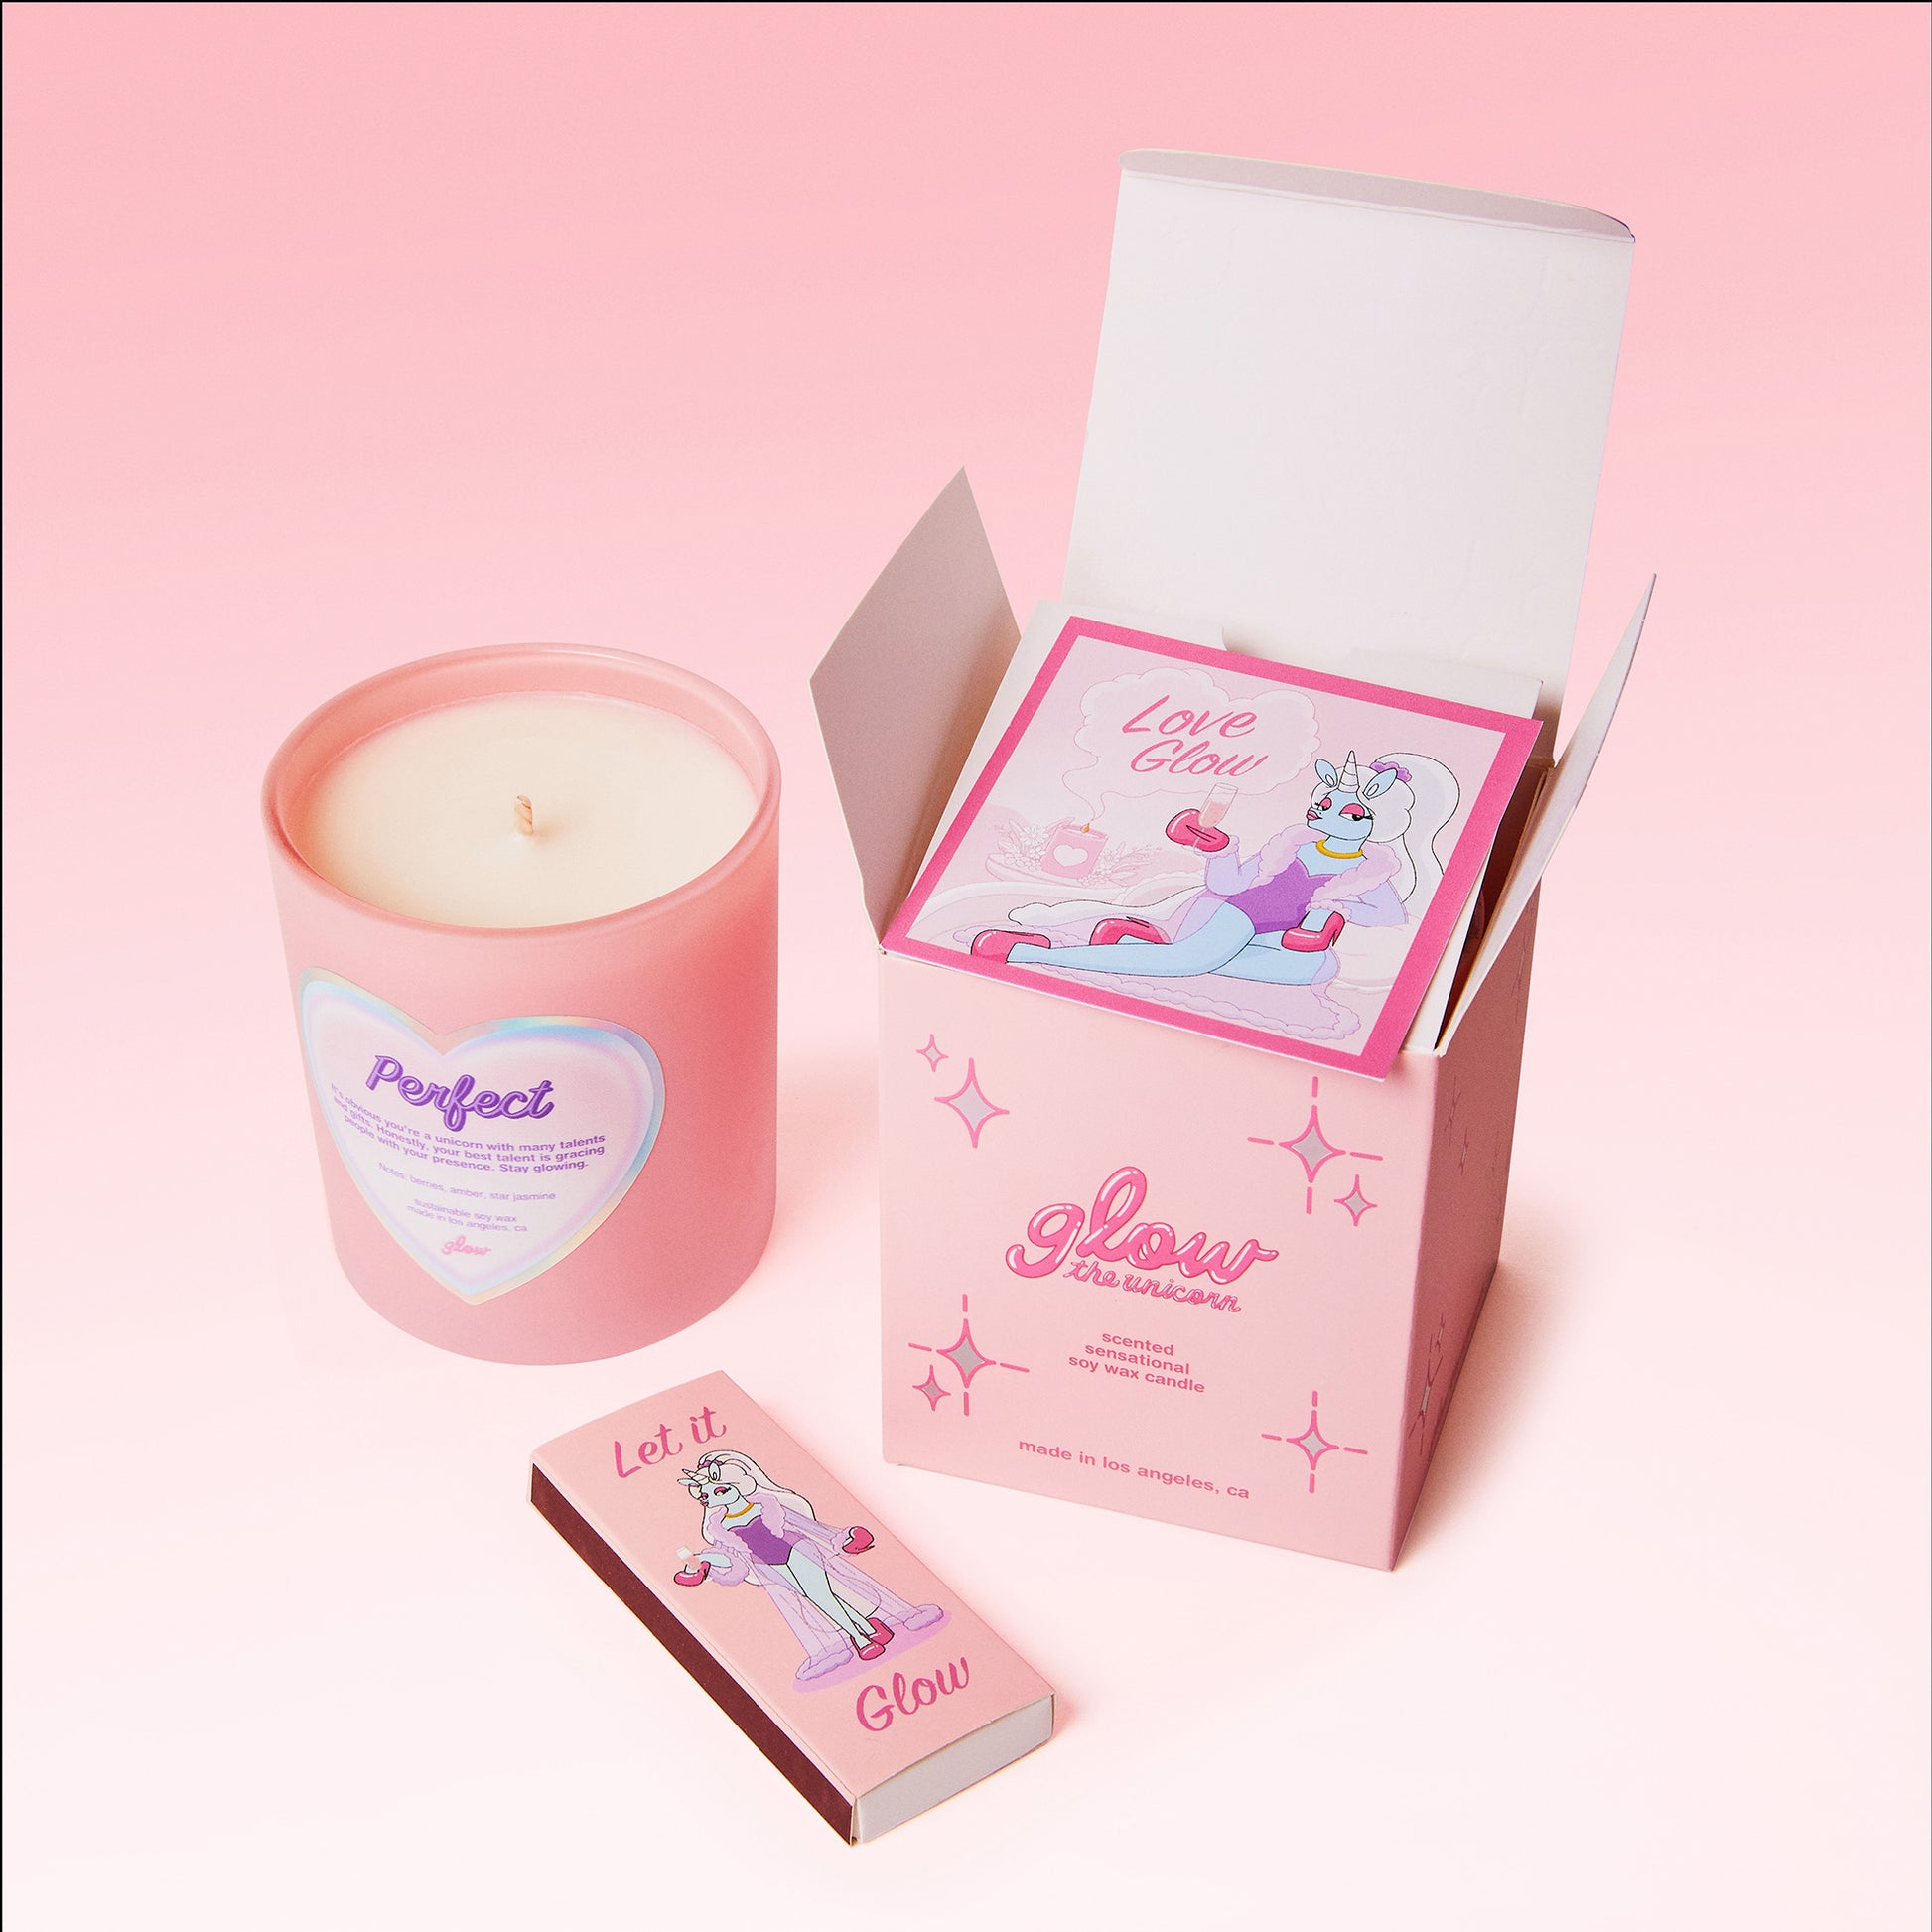 perfect candle set in pink jar with unicorn matches